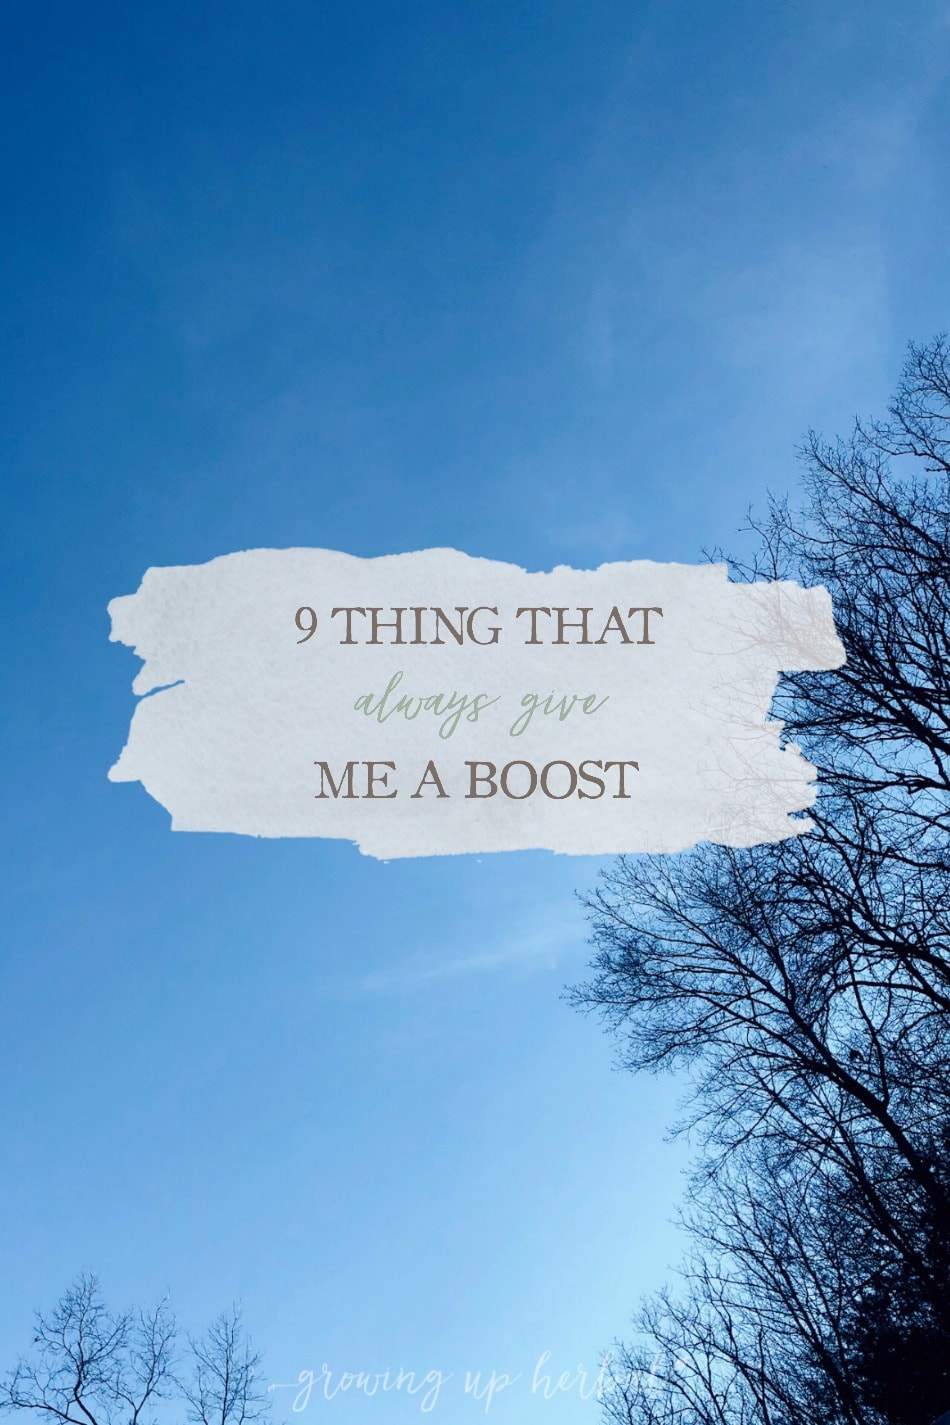 9 Little Things That Always Give Me A Boost | Growing Up Herbal | When rough days come my way, I often think of little things I can do the make my day brighter. Today, I’m sharing 9 things that always give me a boost!